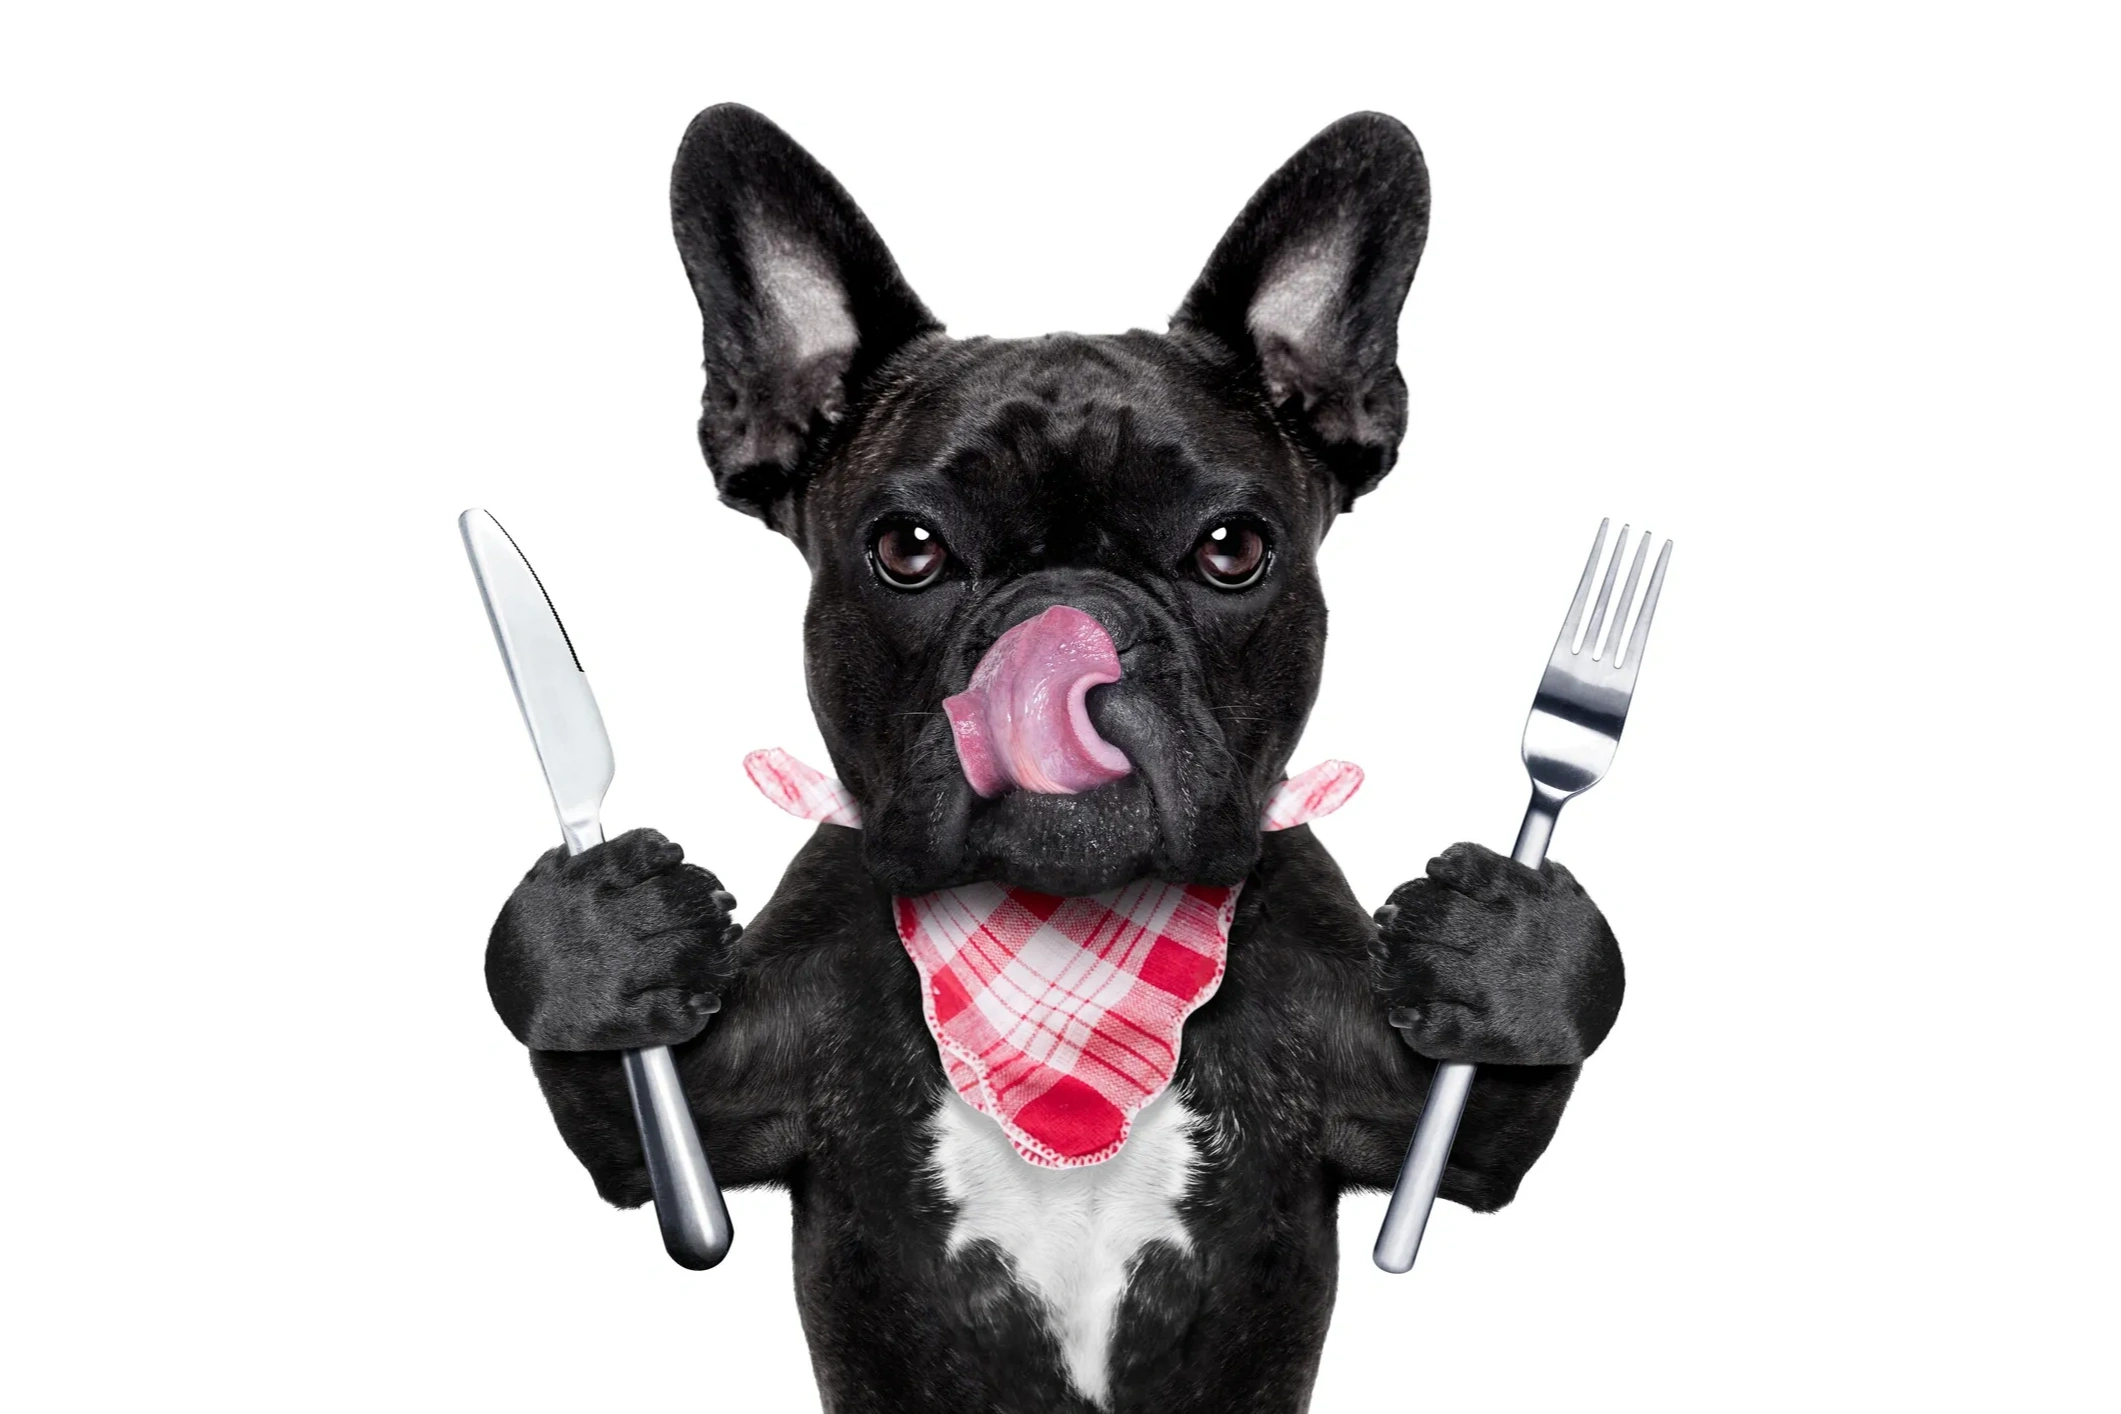 Black dog holding a fork and knife and licking its lips